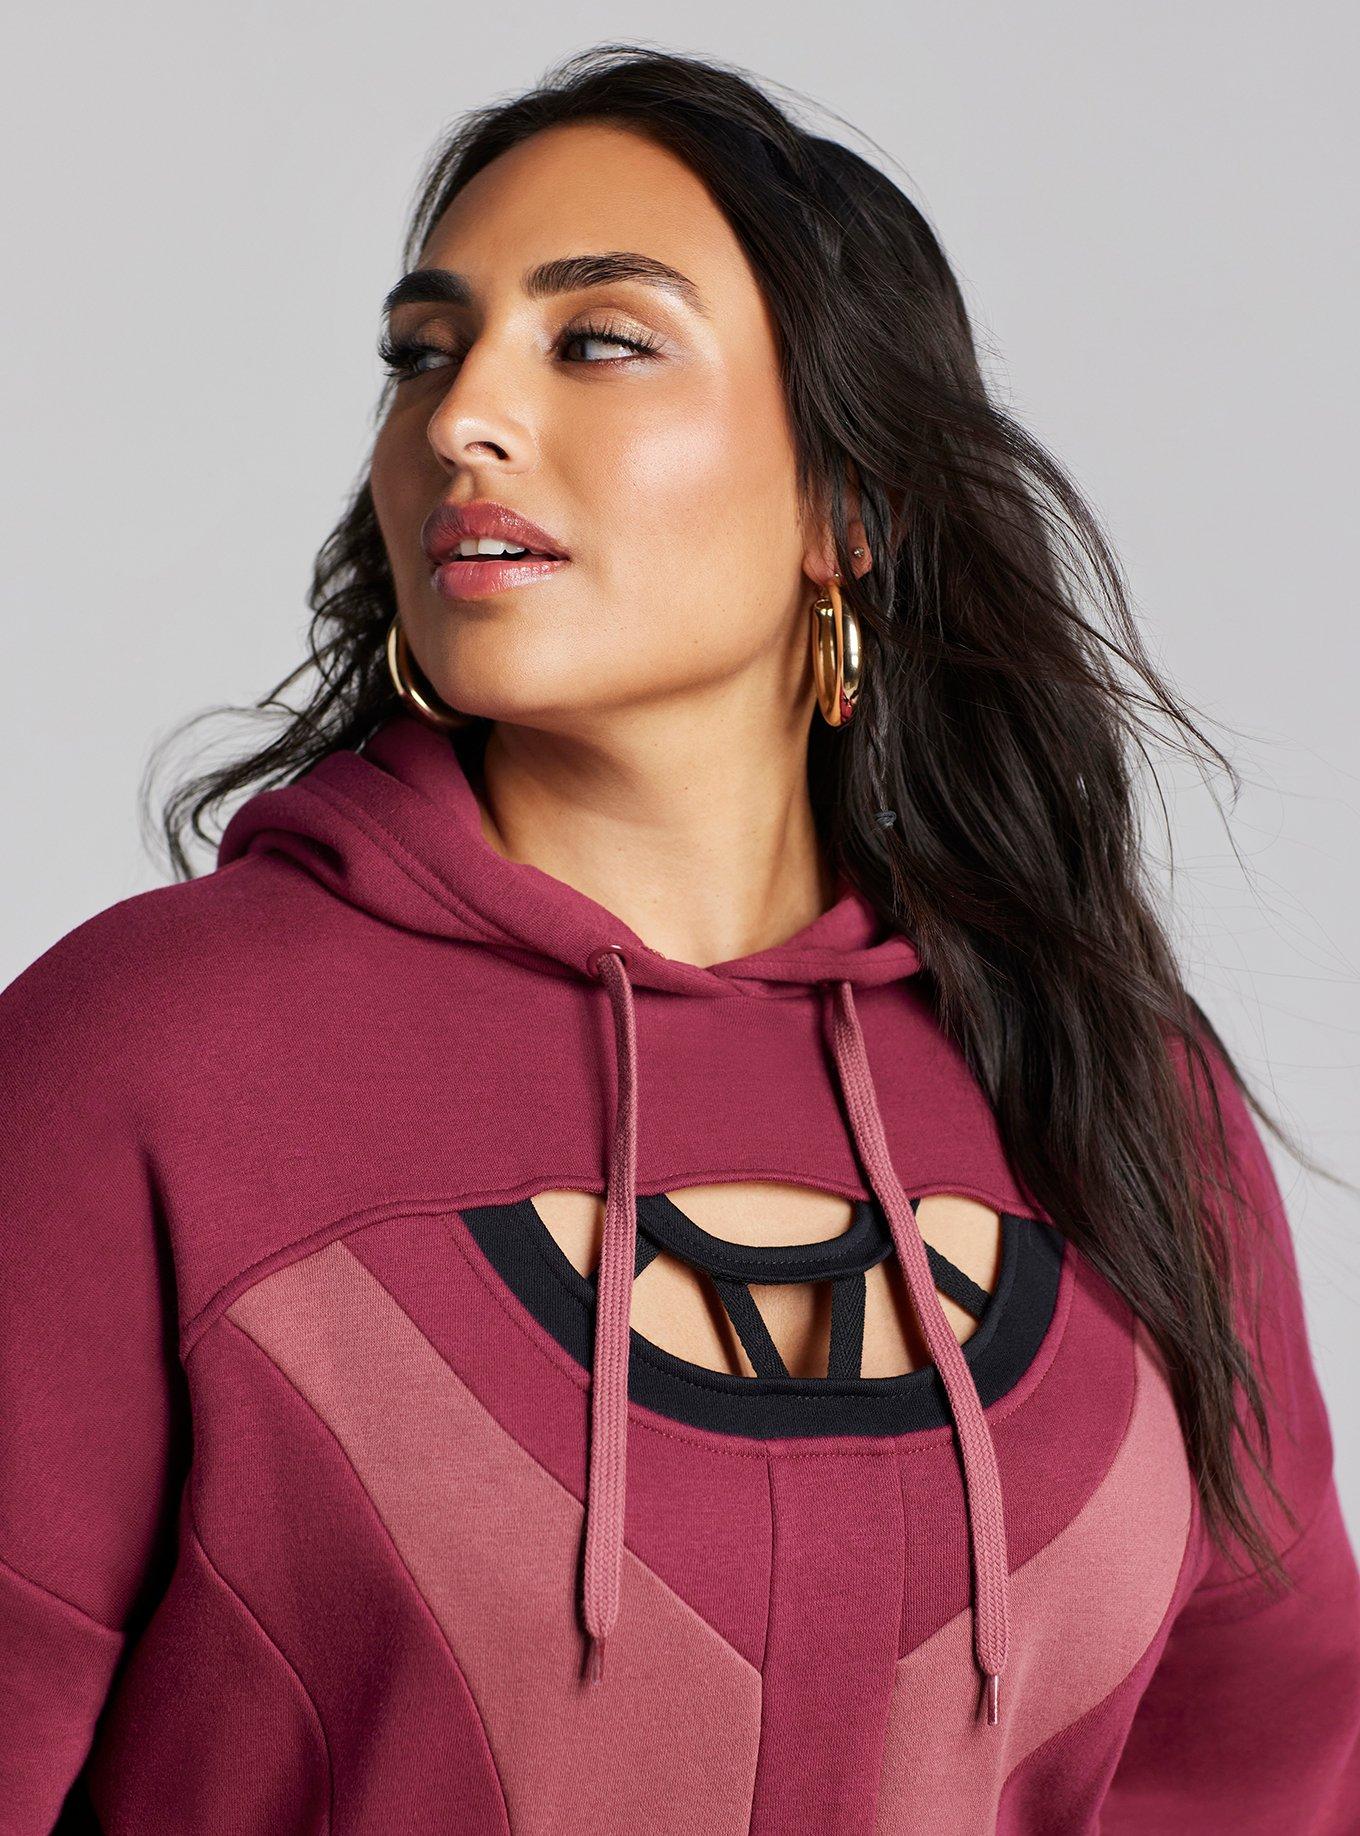 Her Universe Marvel Scarlet Witch Cutout Hoodie Plus Size Her Universe Exclusive, RED, alternate